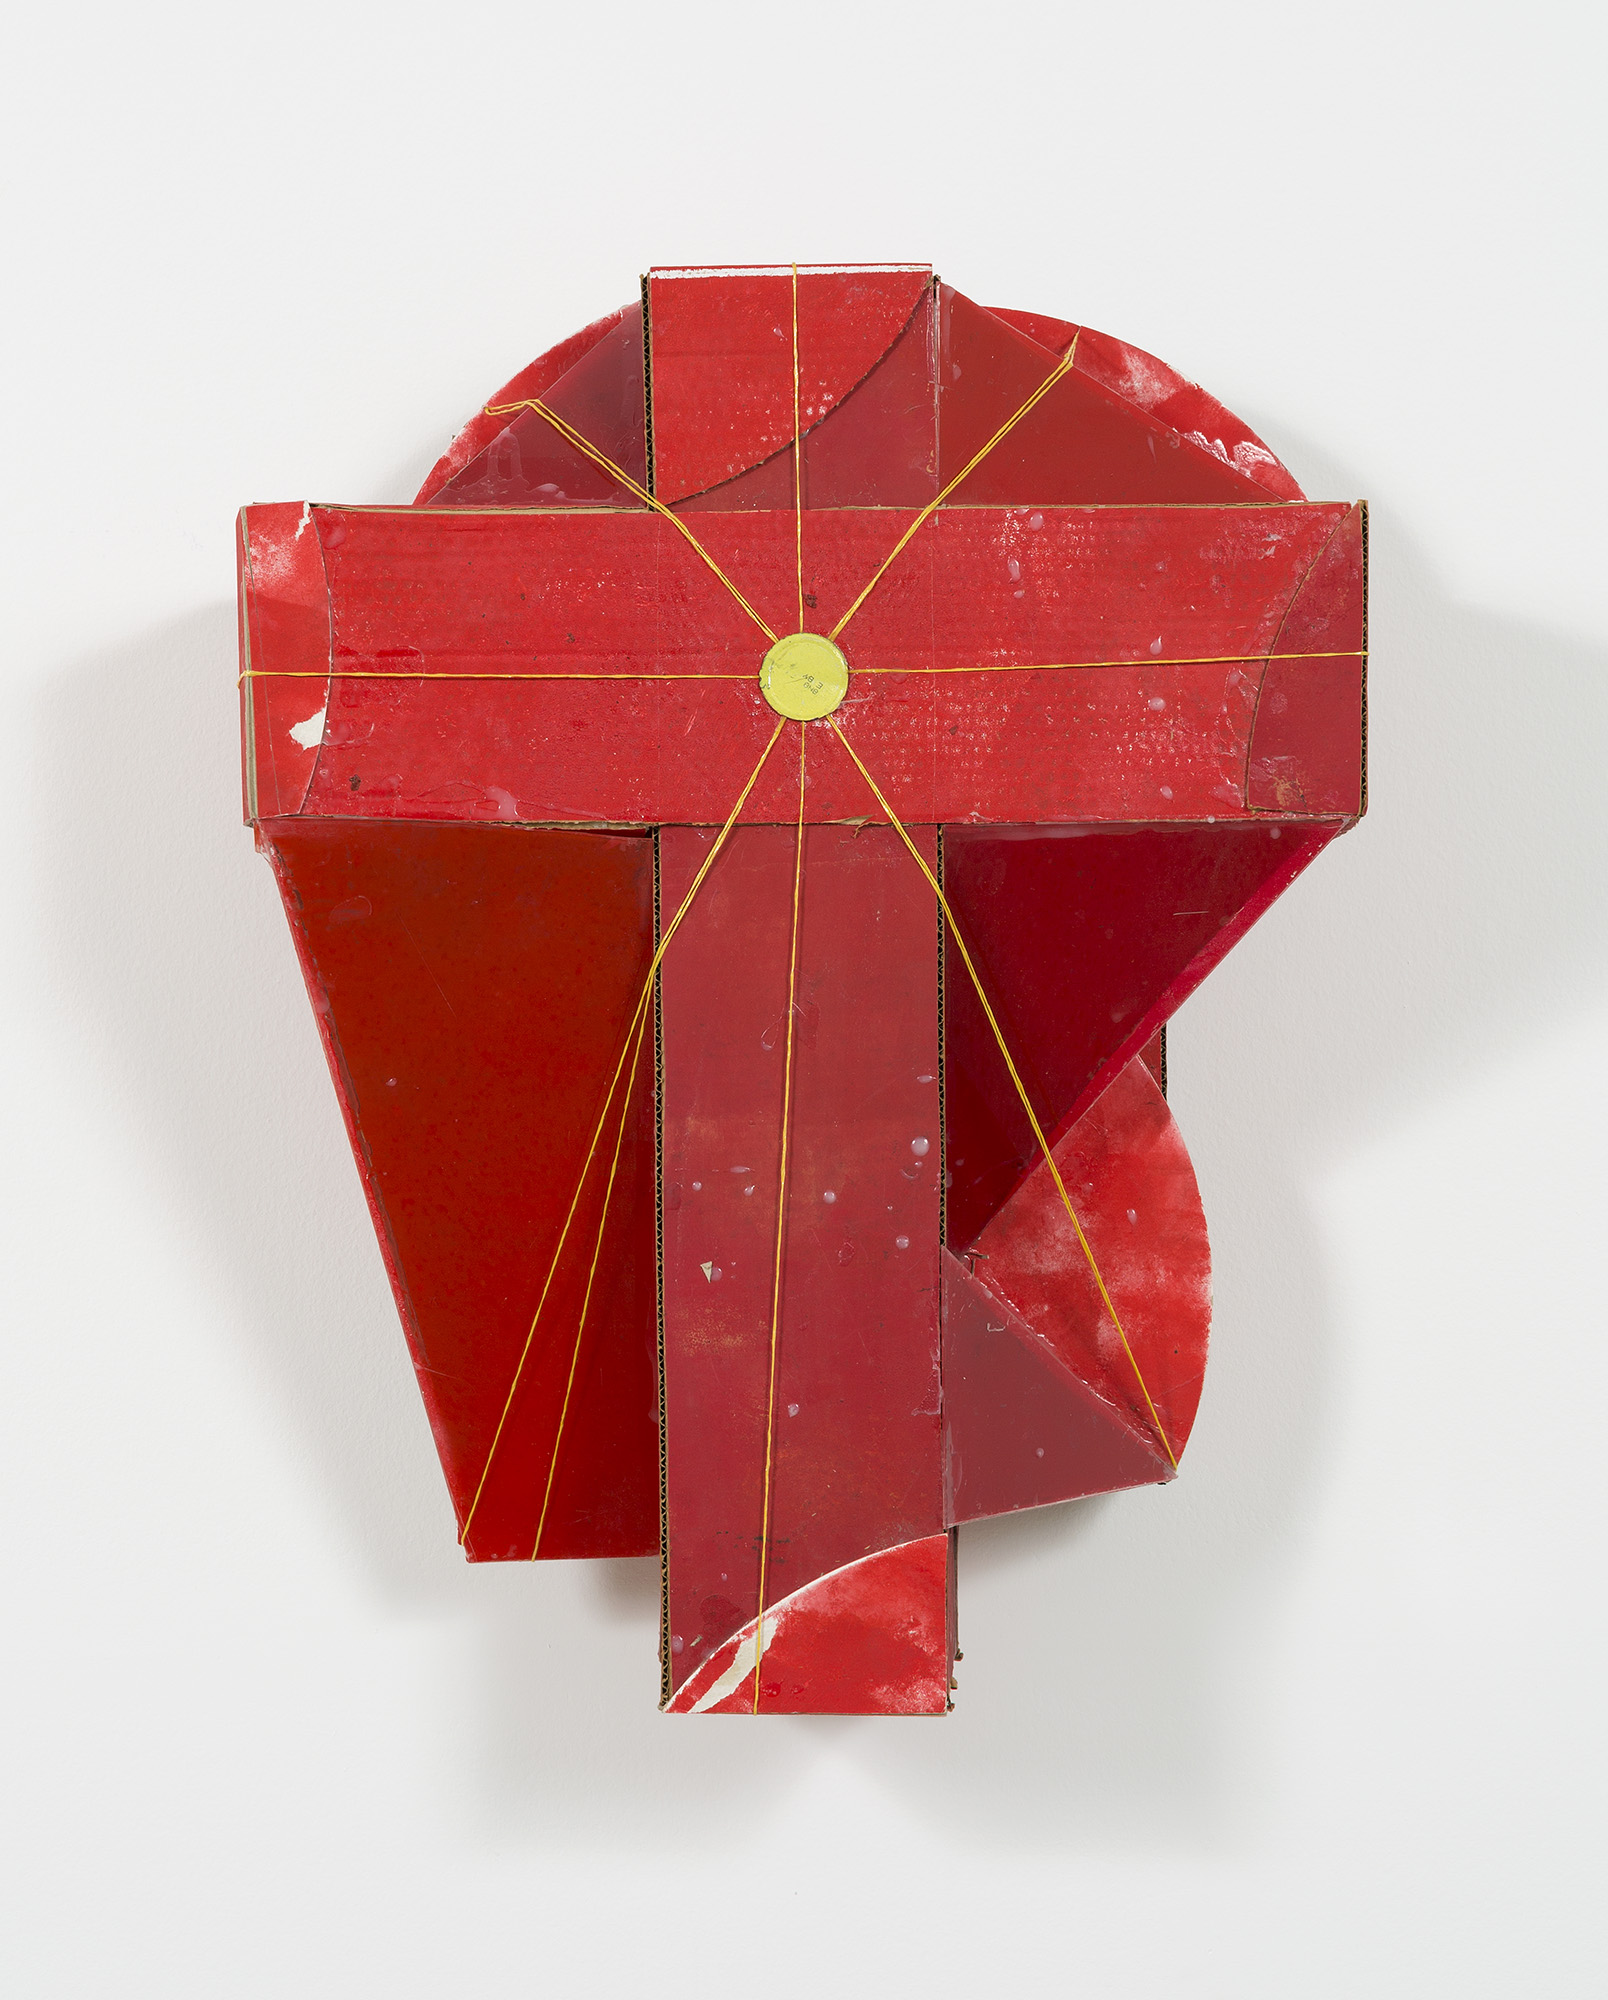 Rose Nolan, <em>A Red Constructed Work</em>  1992-93, synthetic polymer paint, oil paint, cardboard, perspex, tin lid and nylon cord, 84 x 63 x 32 cm, Heide Museum of Modern Art, Gift of Rose Nolan 2014